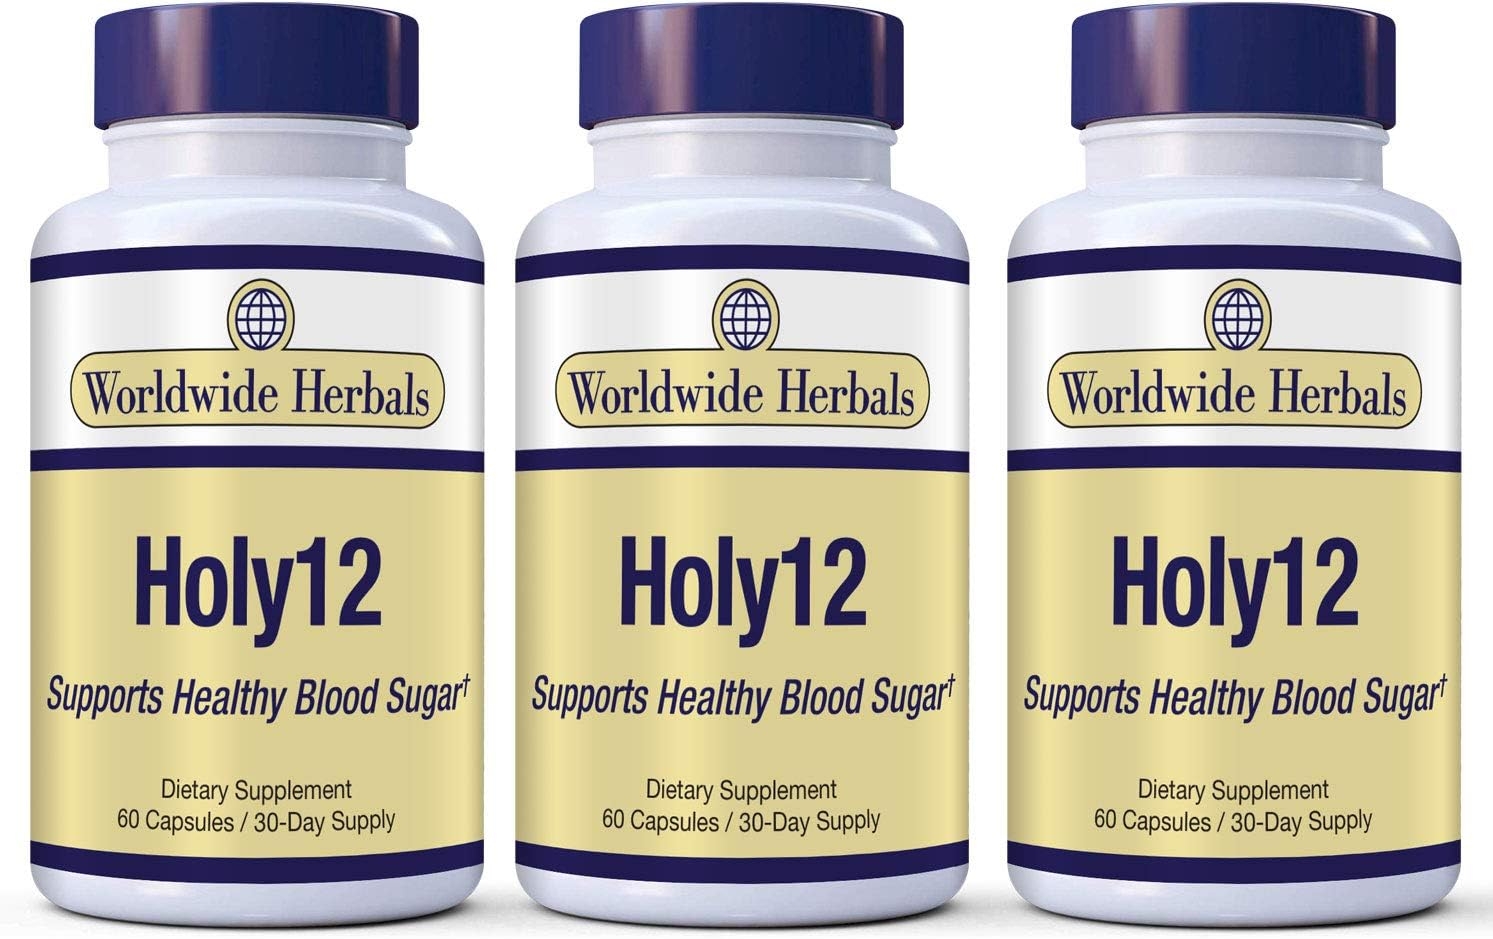 Holy 12 Blood Sugar Support All-Natural Dietary Supplement Supports Healthy Blood Sugar Levels. 90 Day Supply.